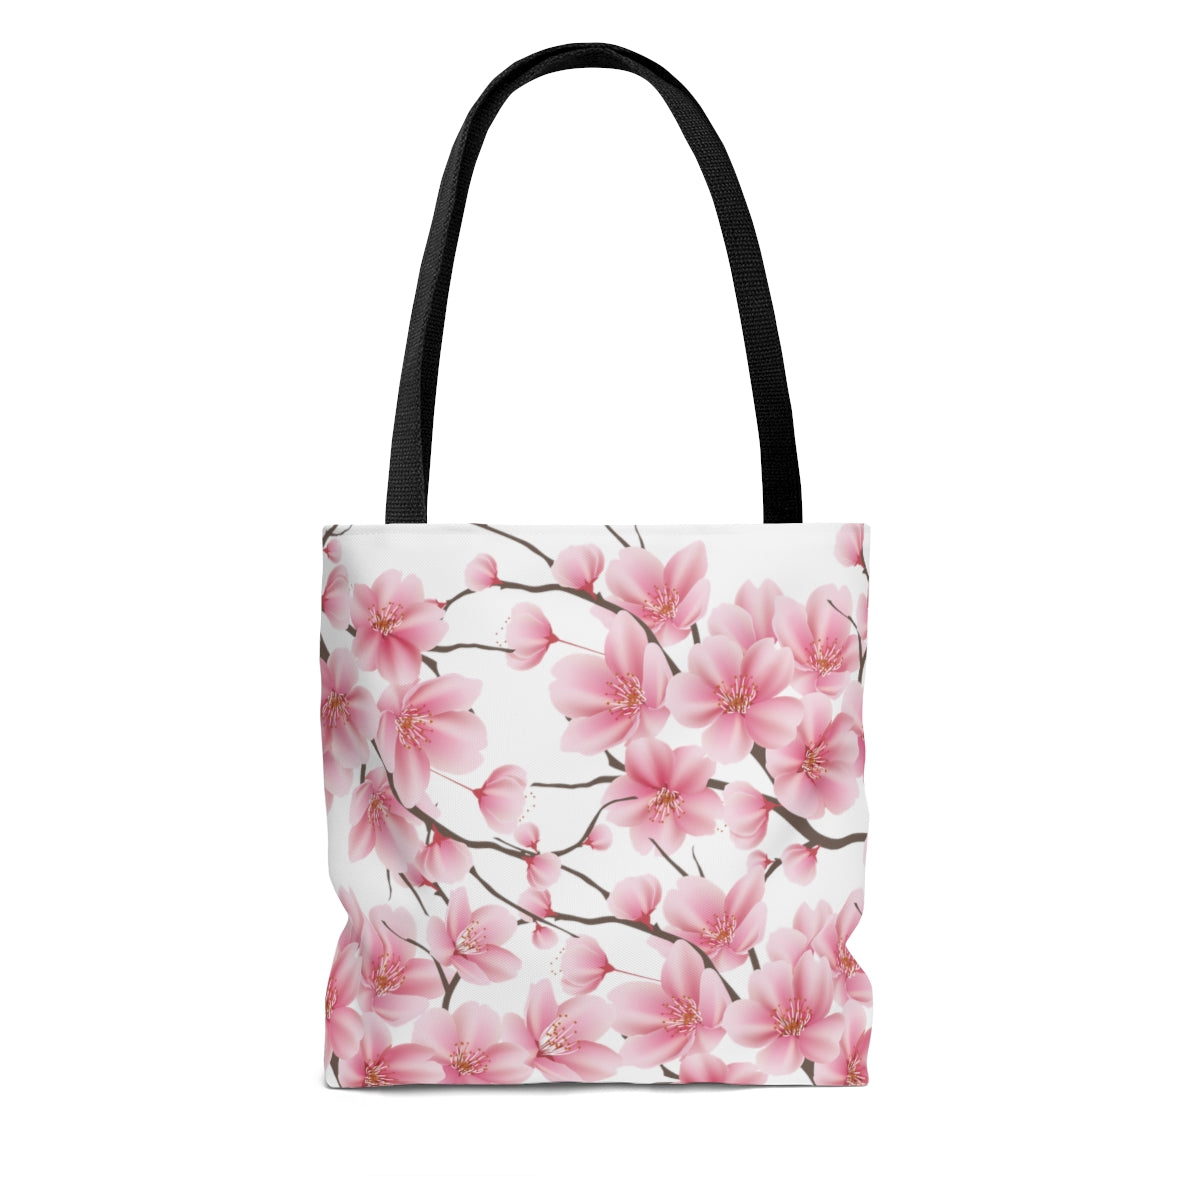 Cherry Blossom Tote Bag / Pink Floral Tote Bag